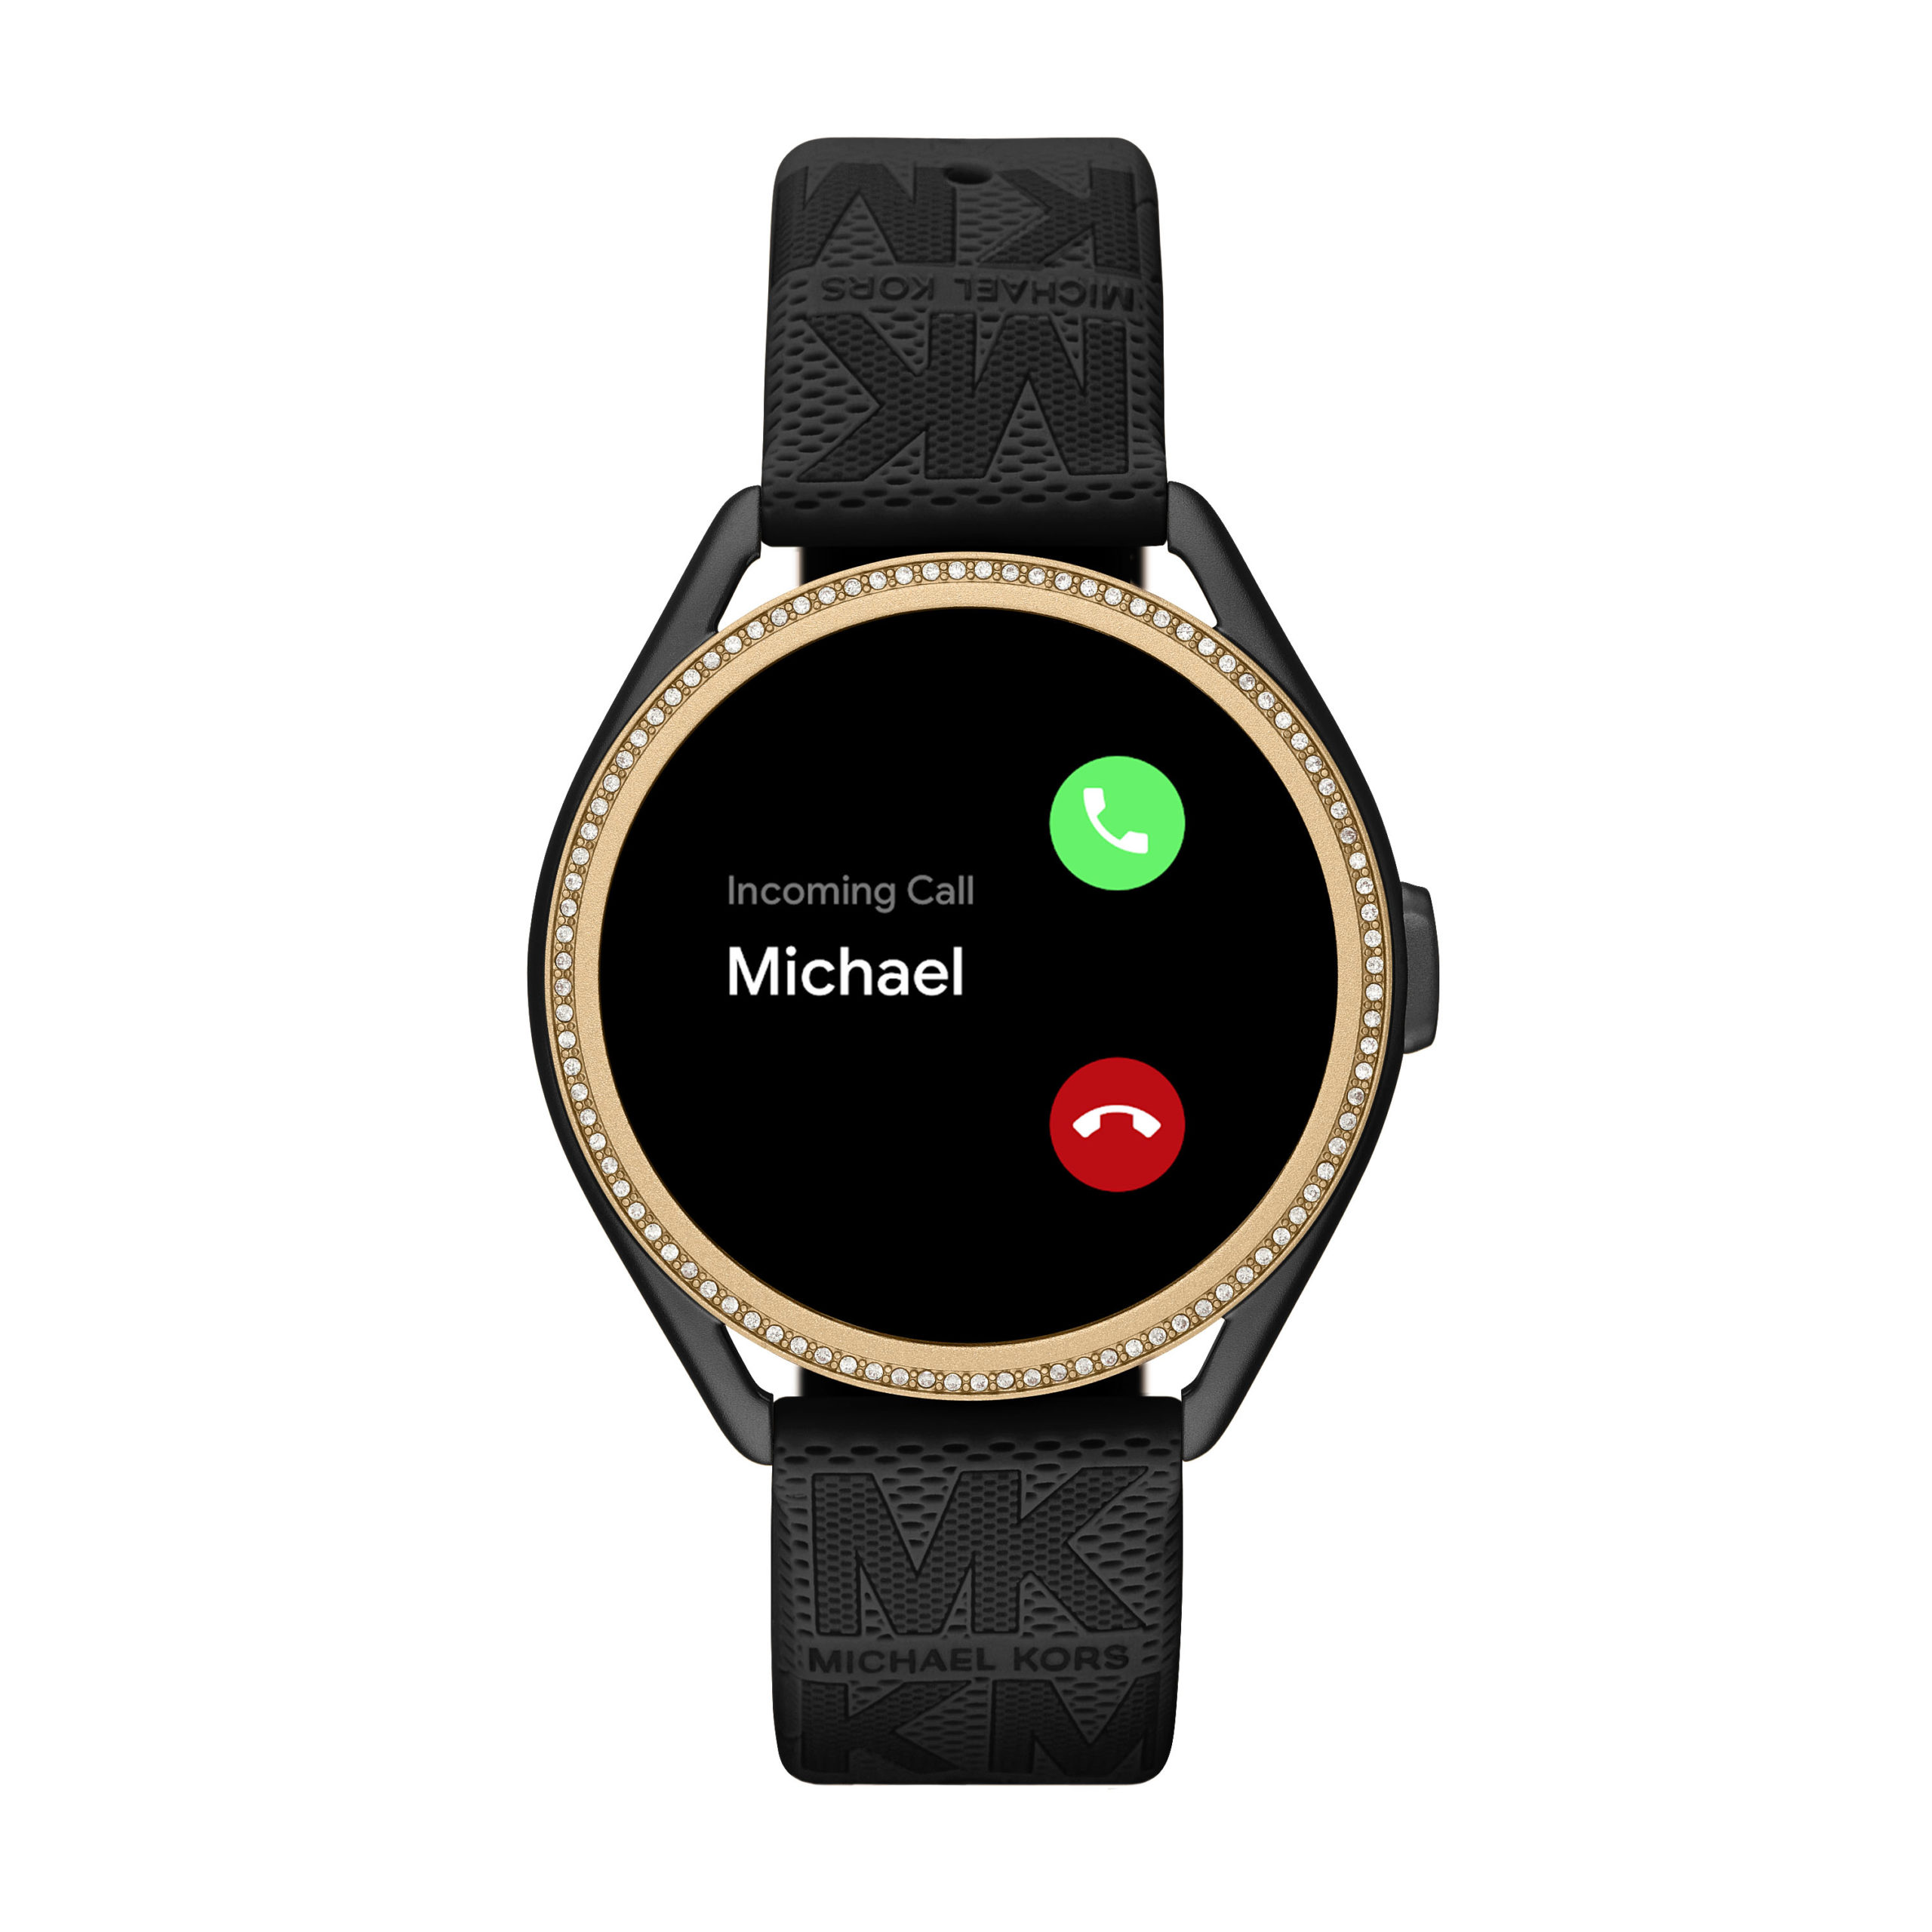 MKGO, the Sporty Spice. (Image: Fossil)